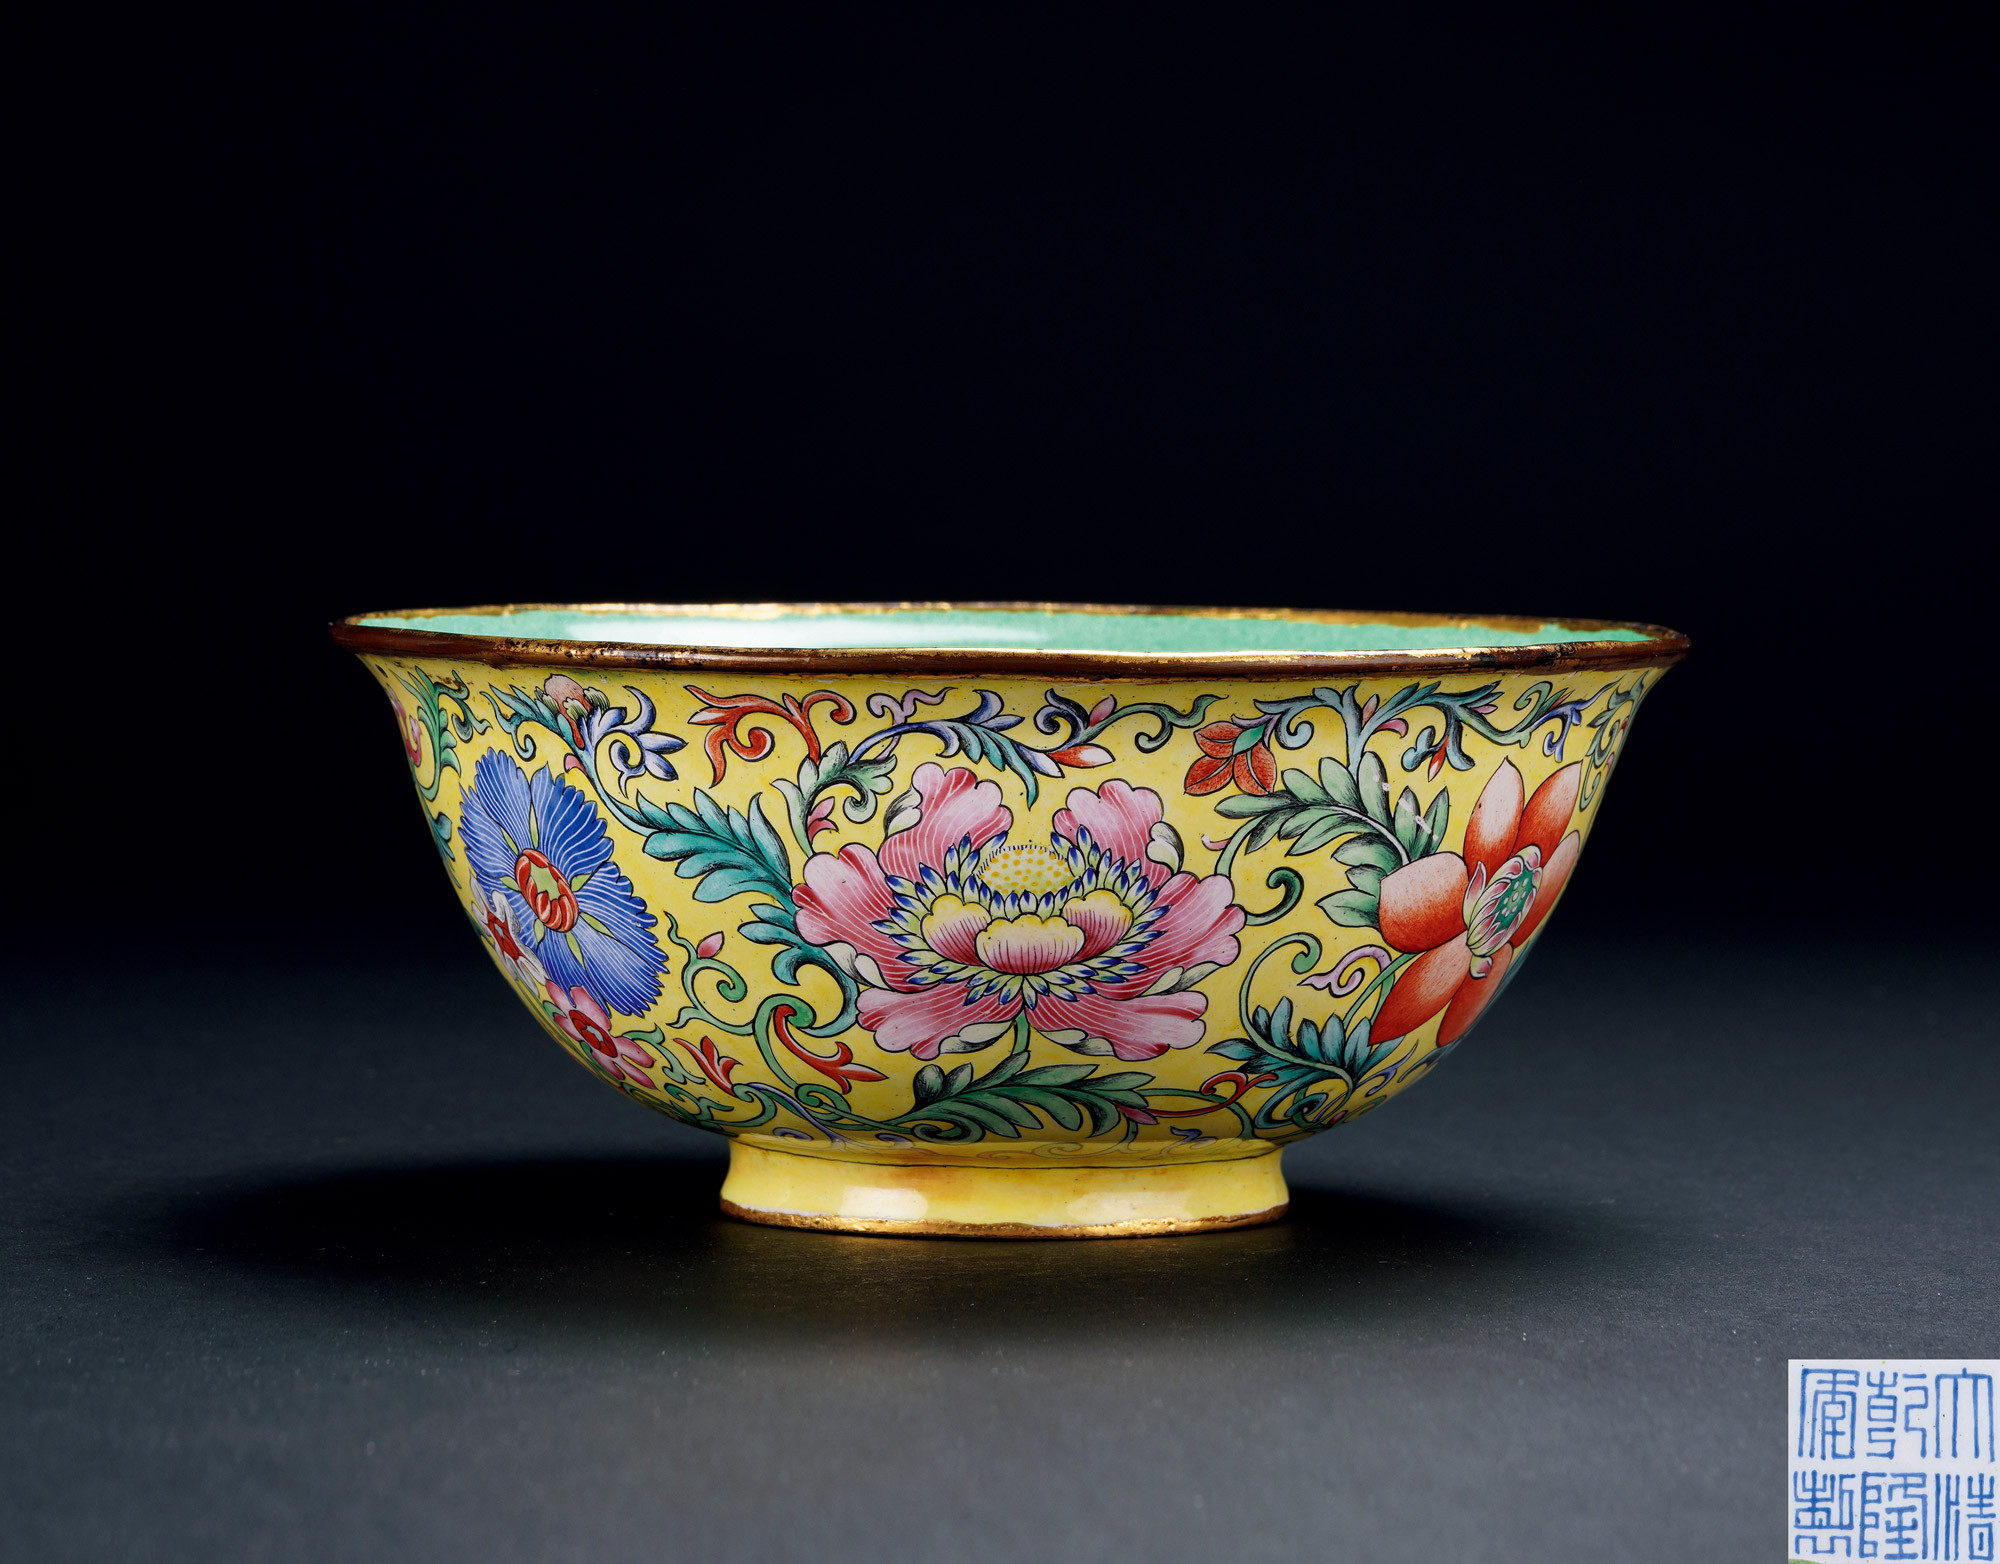 A RARE BRONZE ENAMELED PAINTED‘WESTERN FLORAL’BOWL